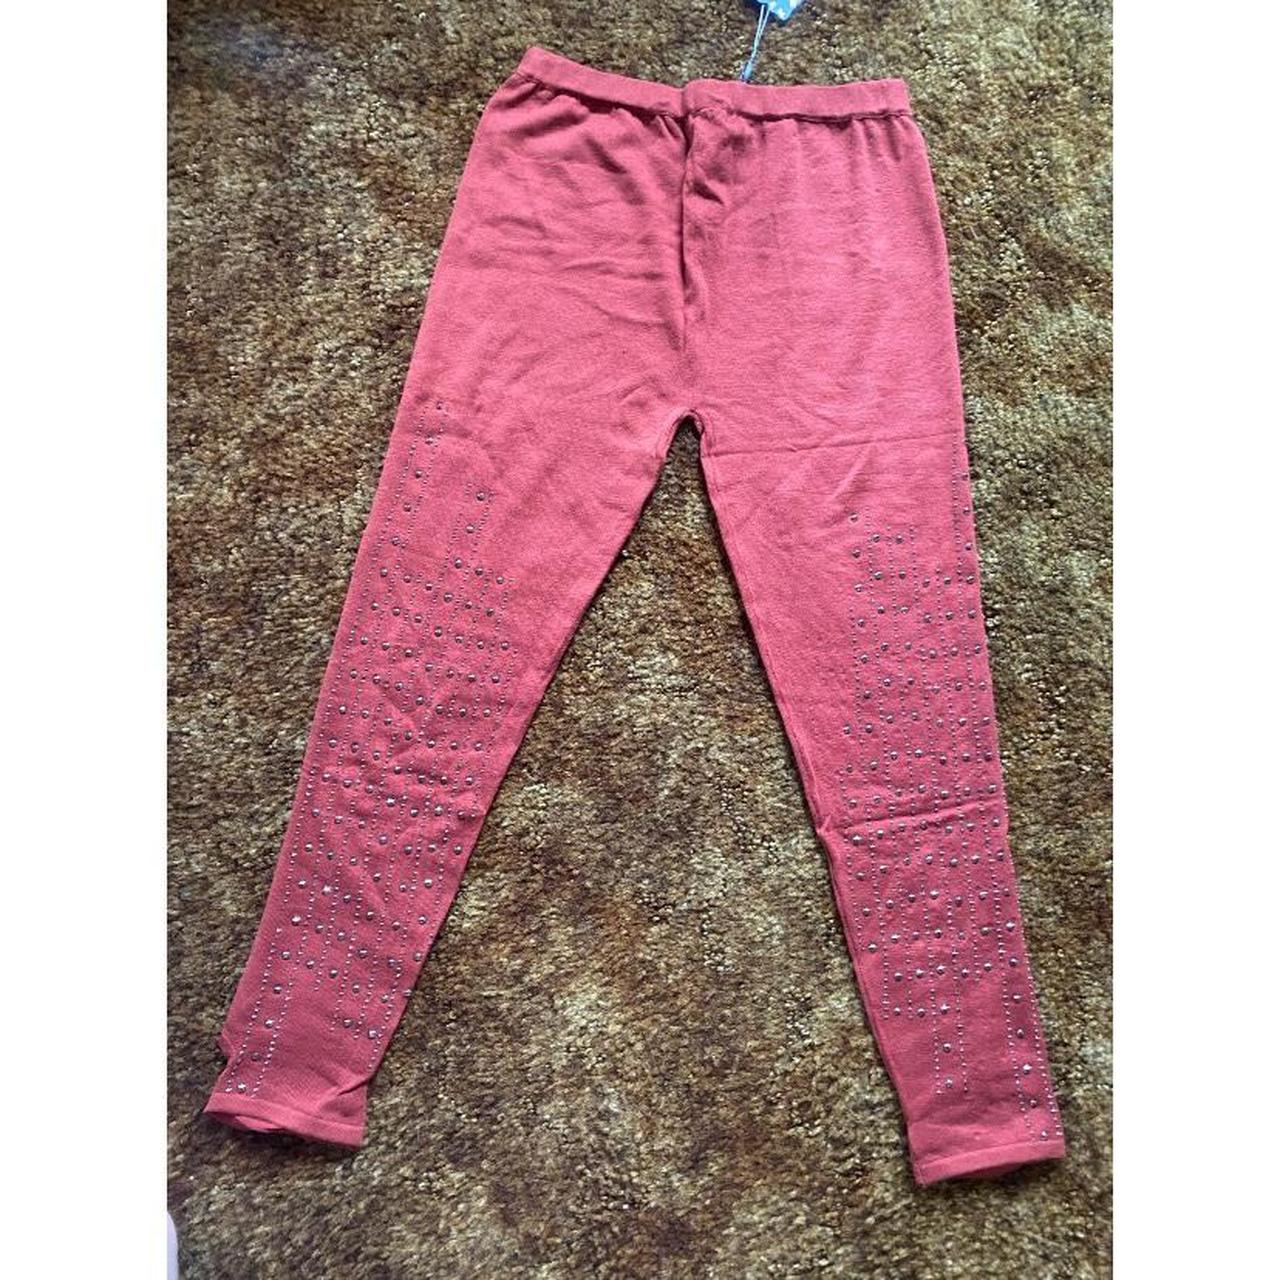 Rust red/orange bedazzled leggings. Brand new with... - Depop